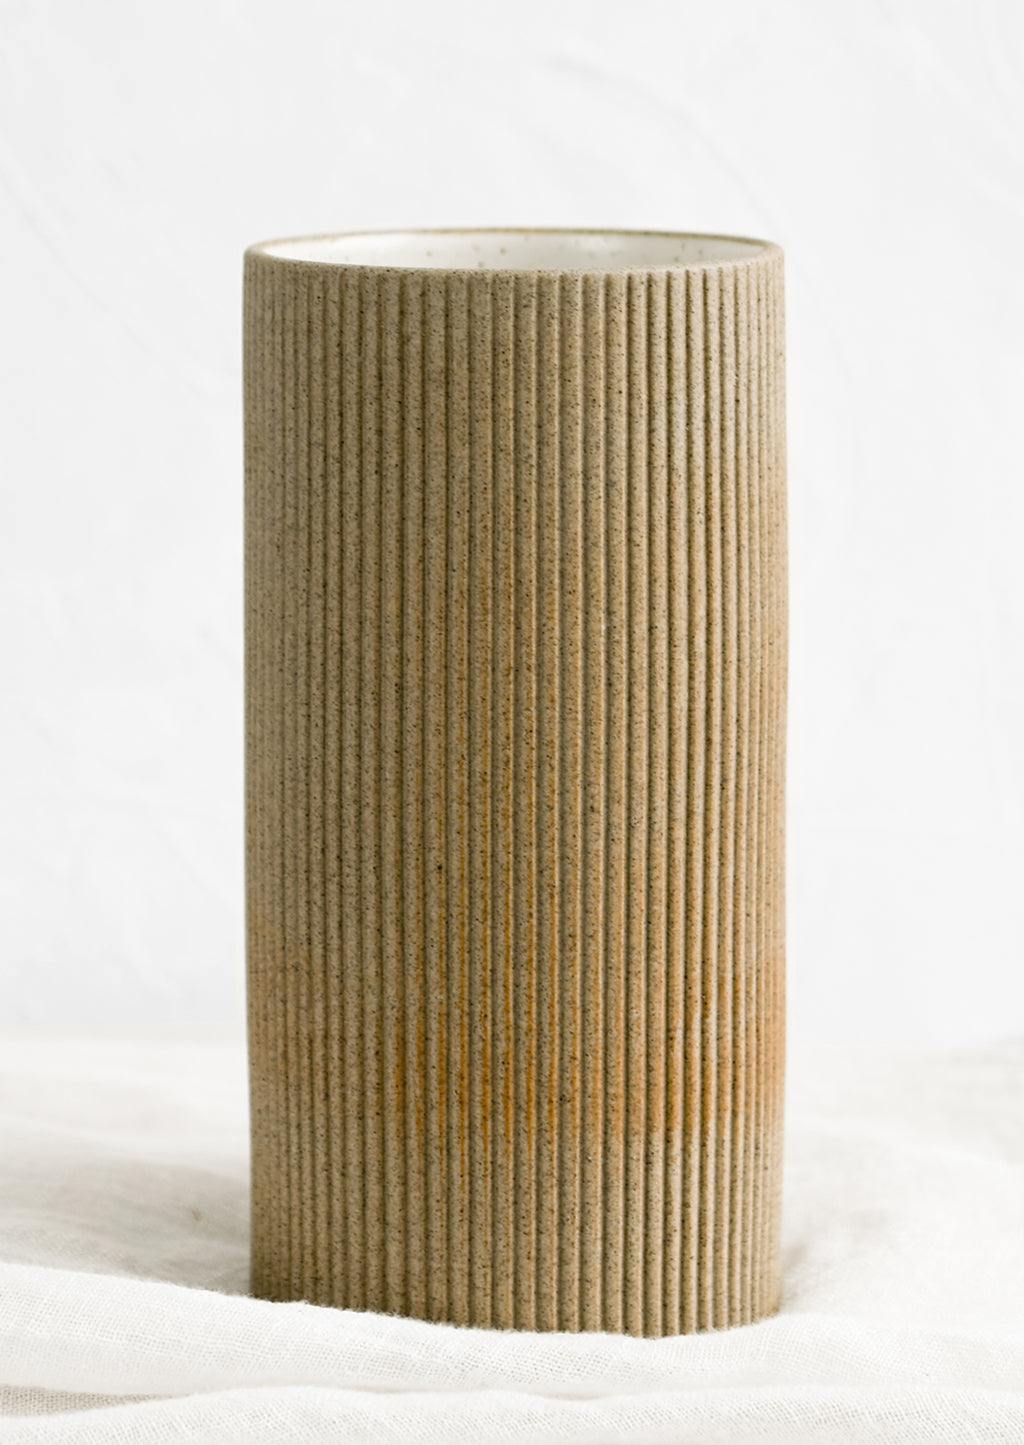 2: A sand brown cylindrical ceramic vase.